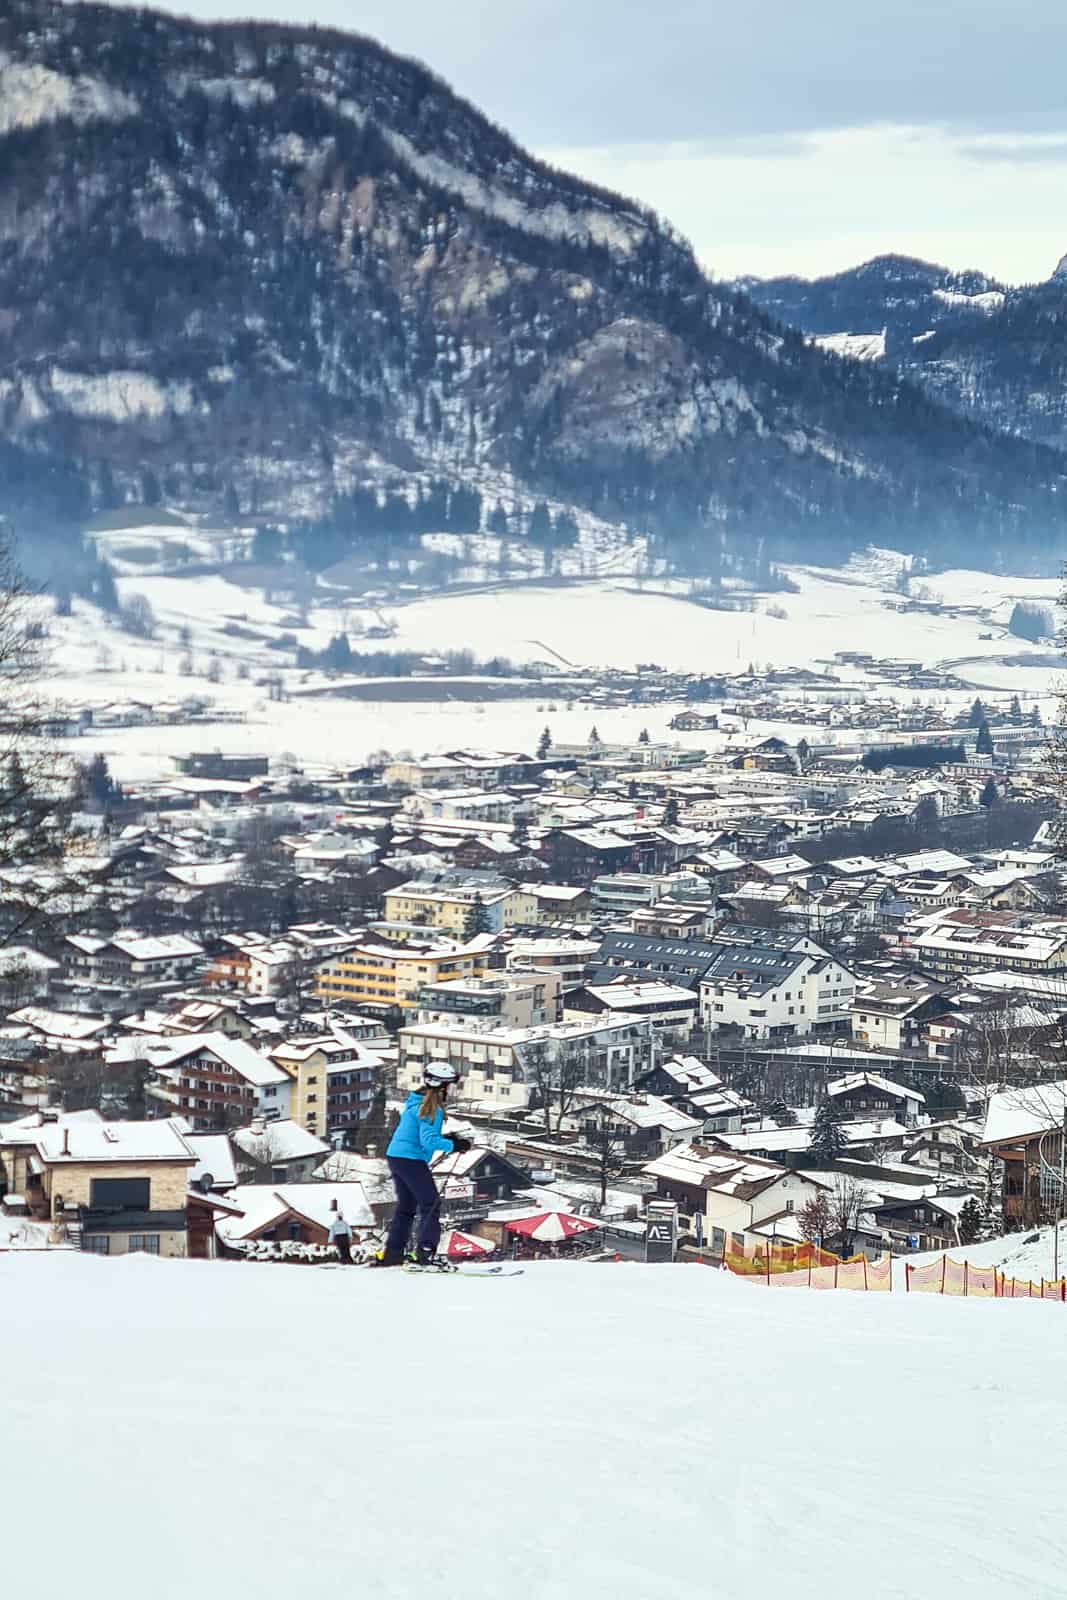 A skiier at the end of a run that looks over and leads into the town of St. Johann in Tirol. 